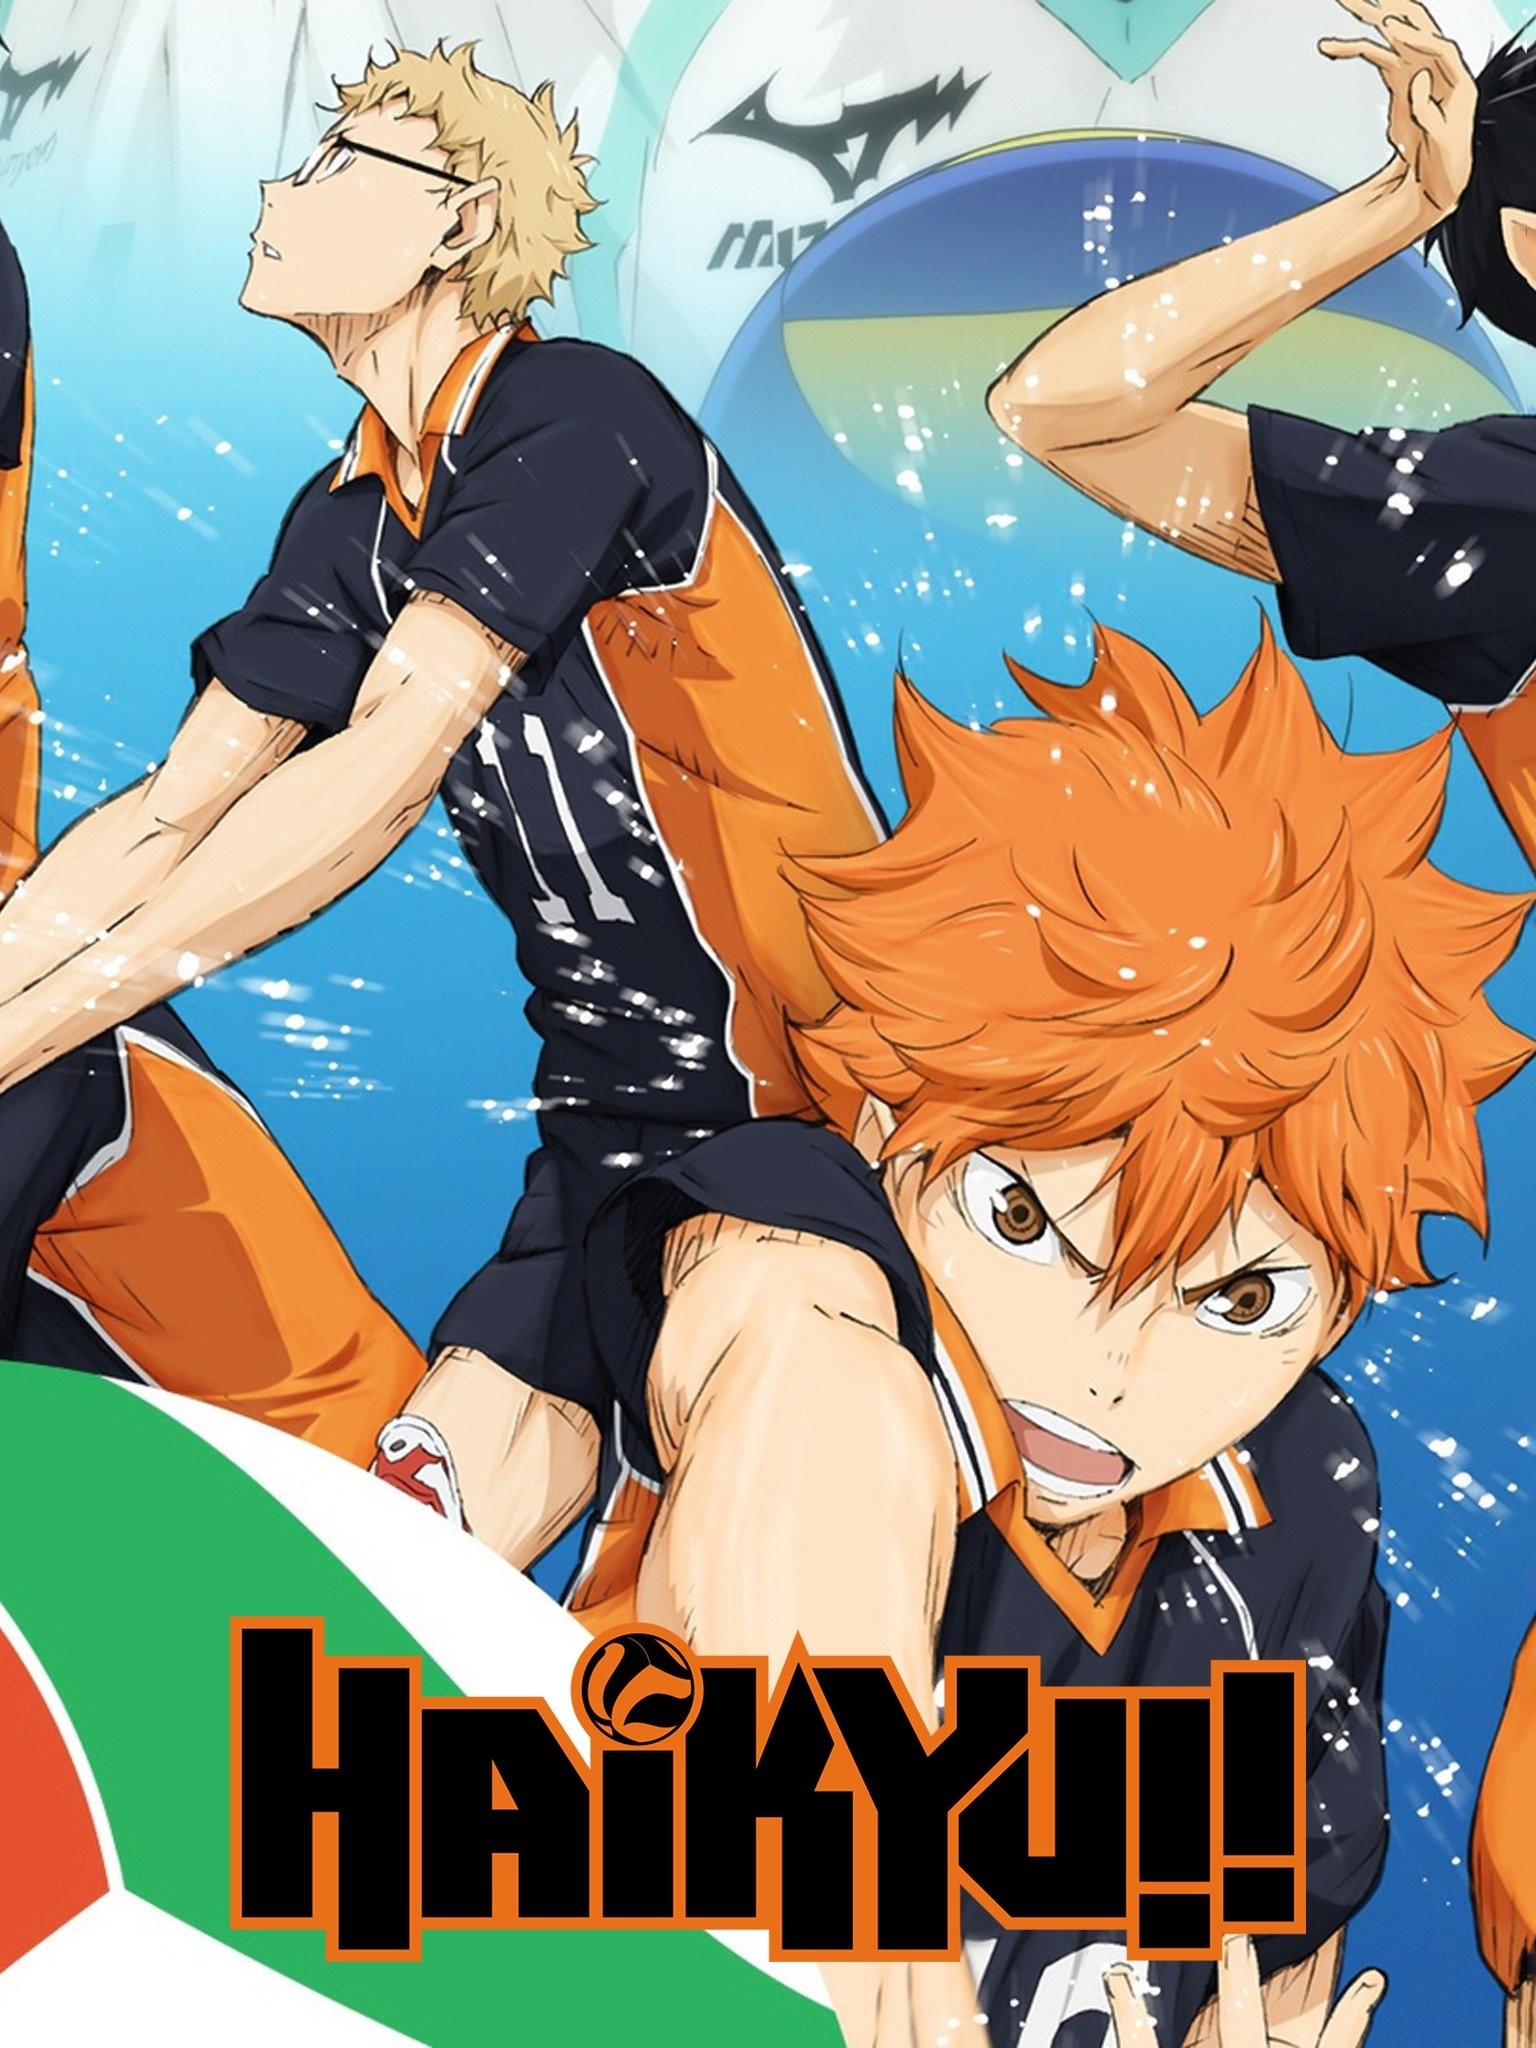 Haikyuu Anime  An anime about high school volleyball  Fall in Sports